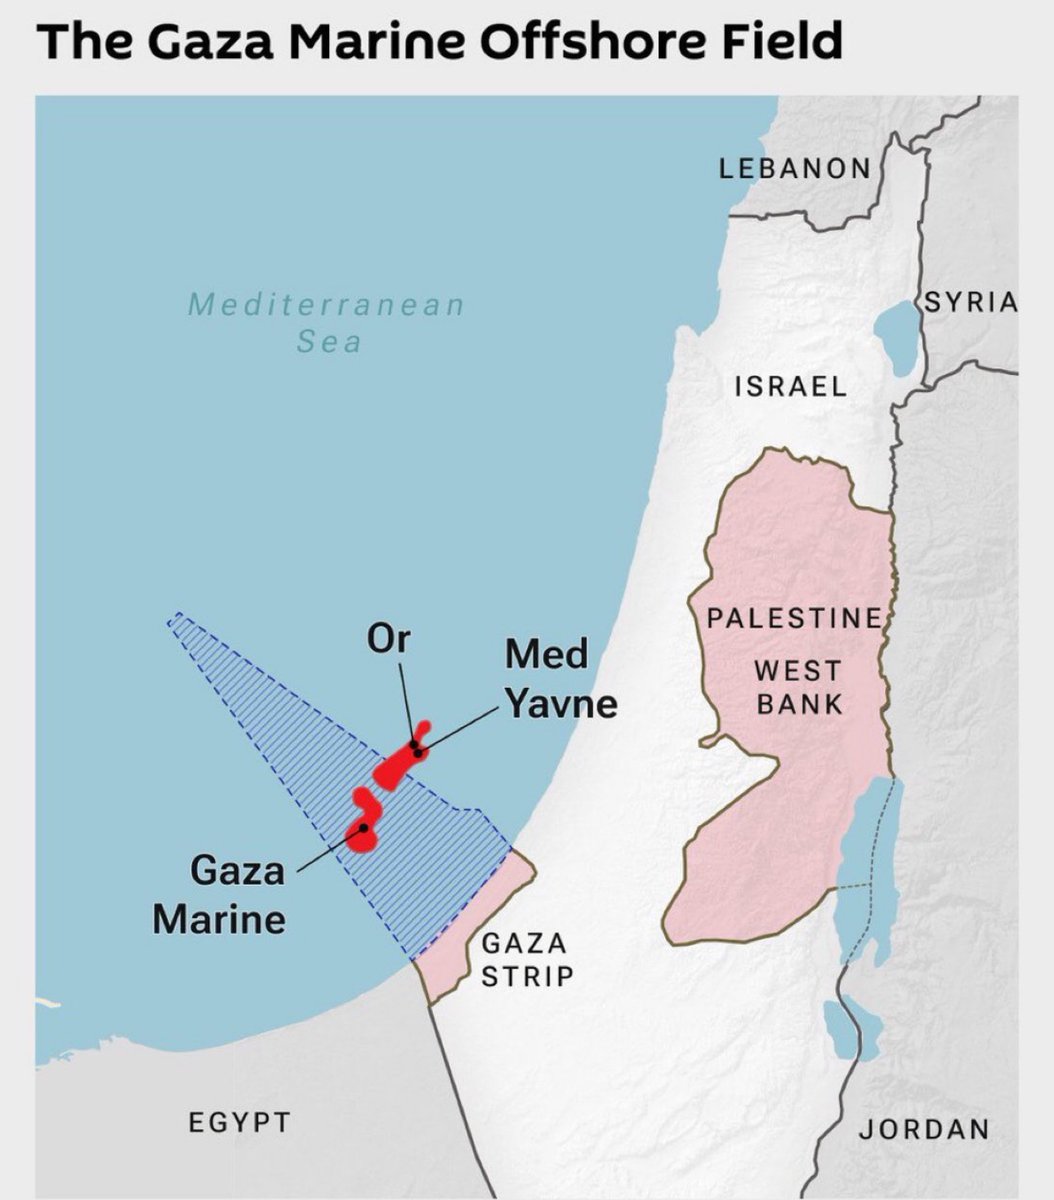 BIDEN WANTS TO BUILD A PORT IN GAZA TO EXPORT GAS FROM THE COAST OF GAZA

It’s not for aid. 

It’s to steal resources.